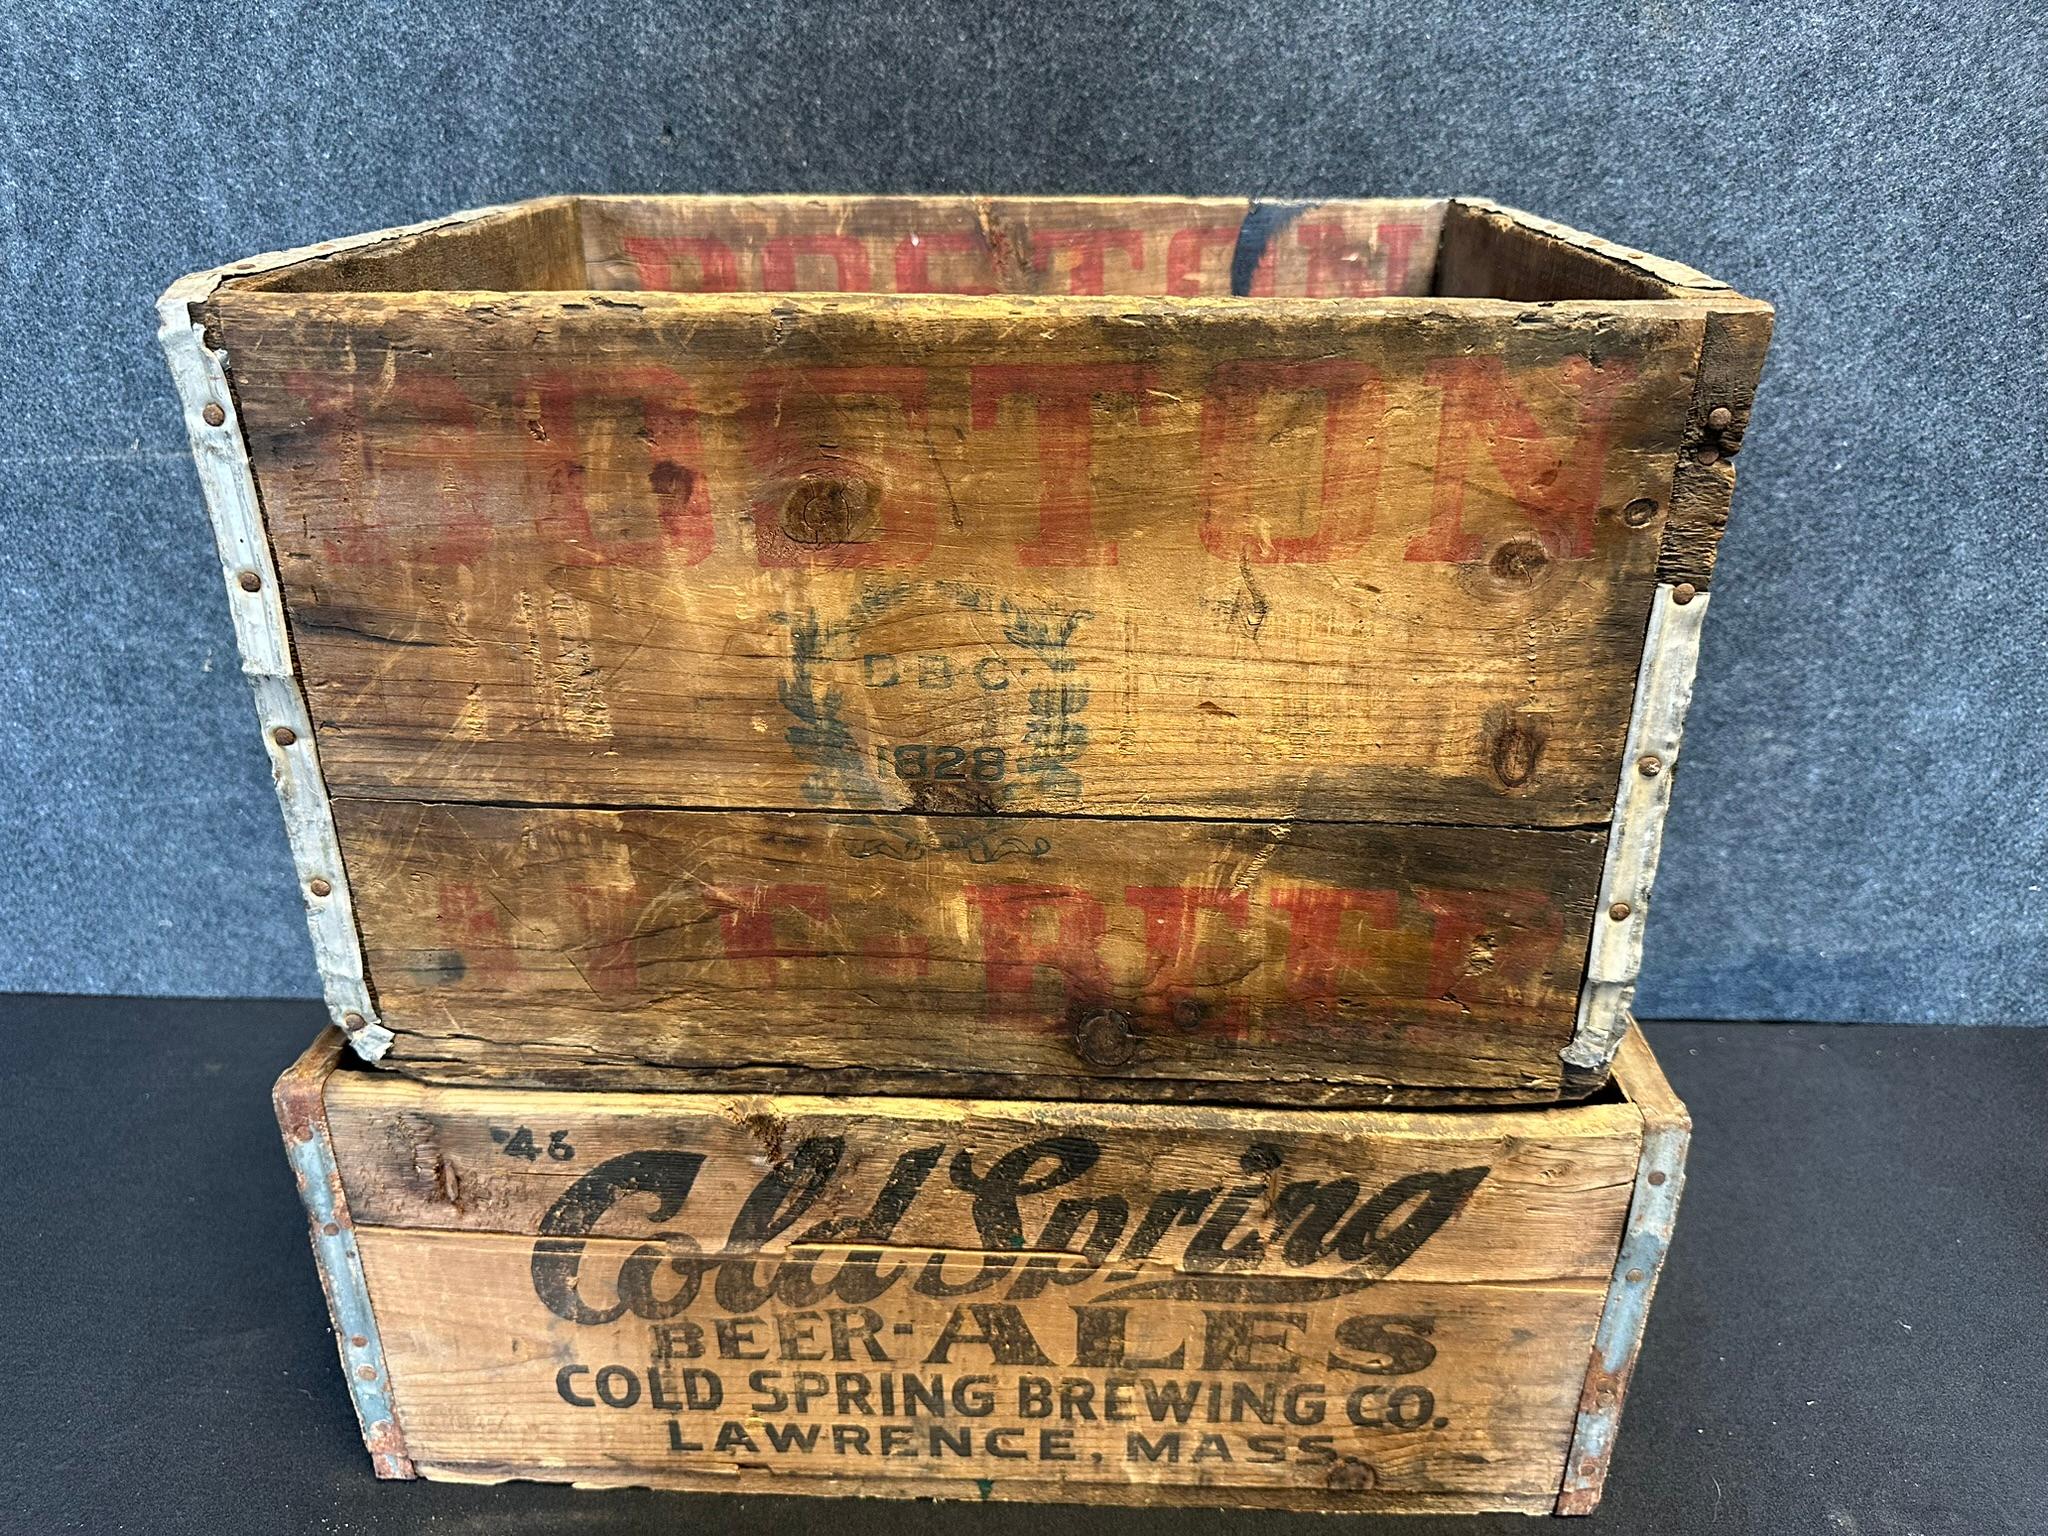 Boston Ale Beer & Cold Spring Beer Ales Brewing Co Wooden Shipping Crate Pair